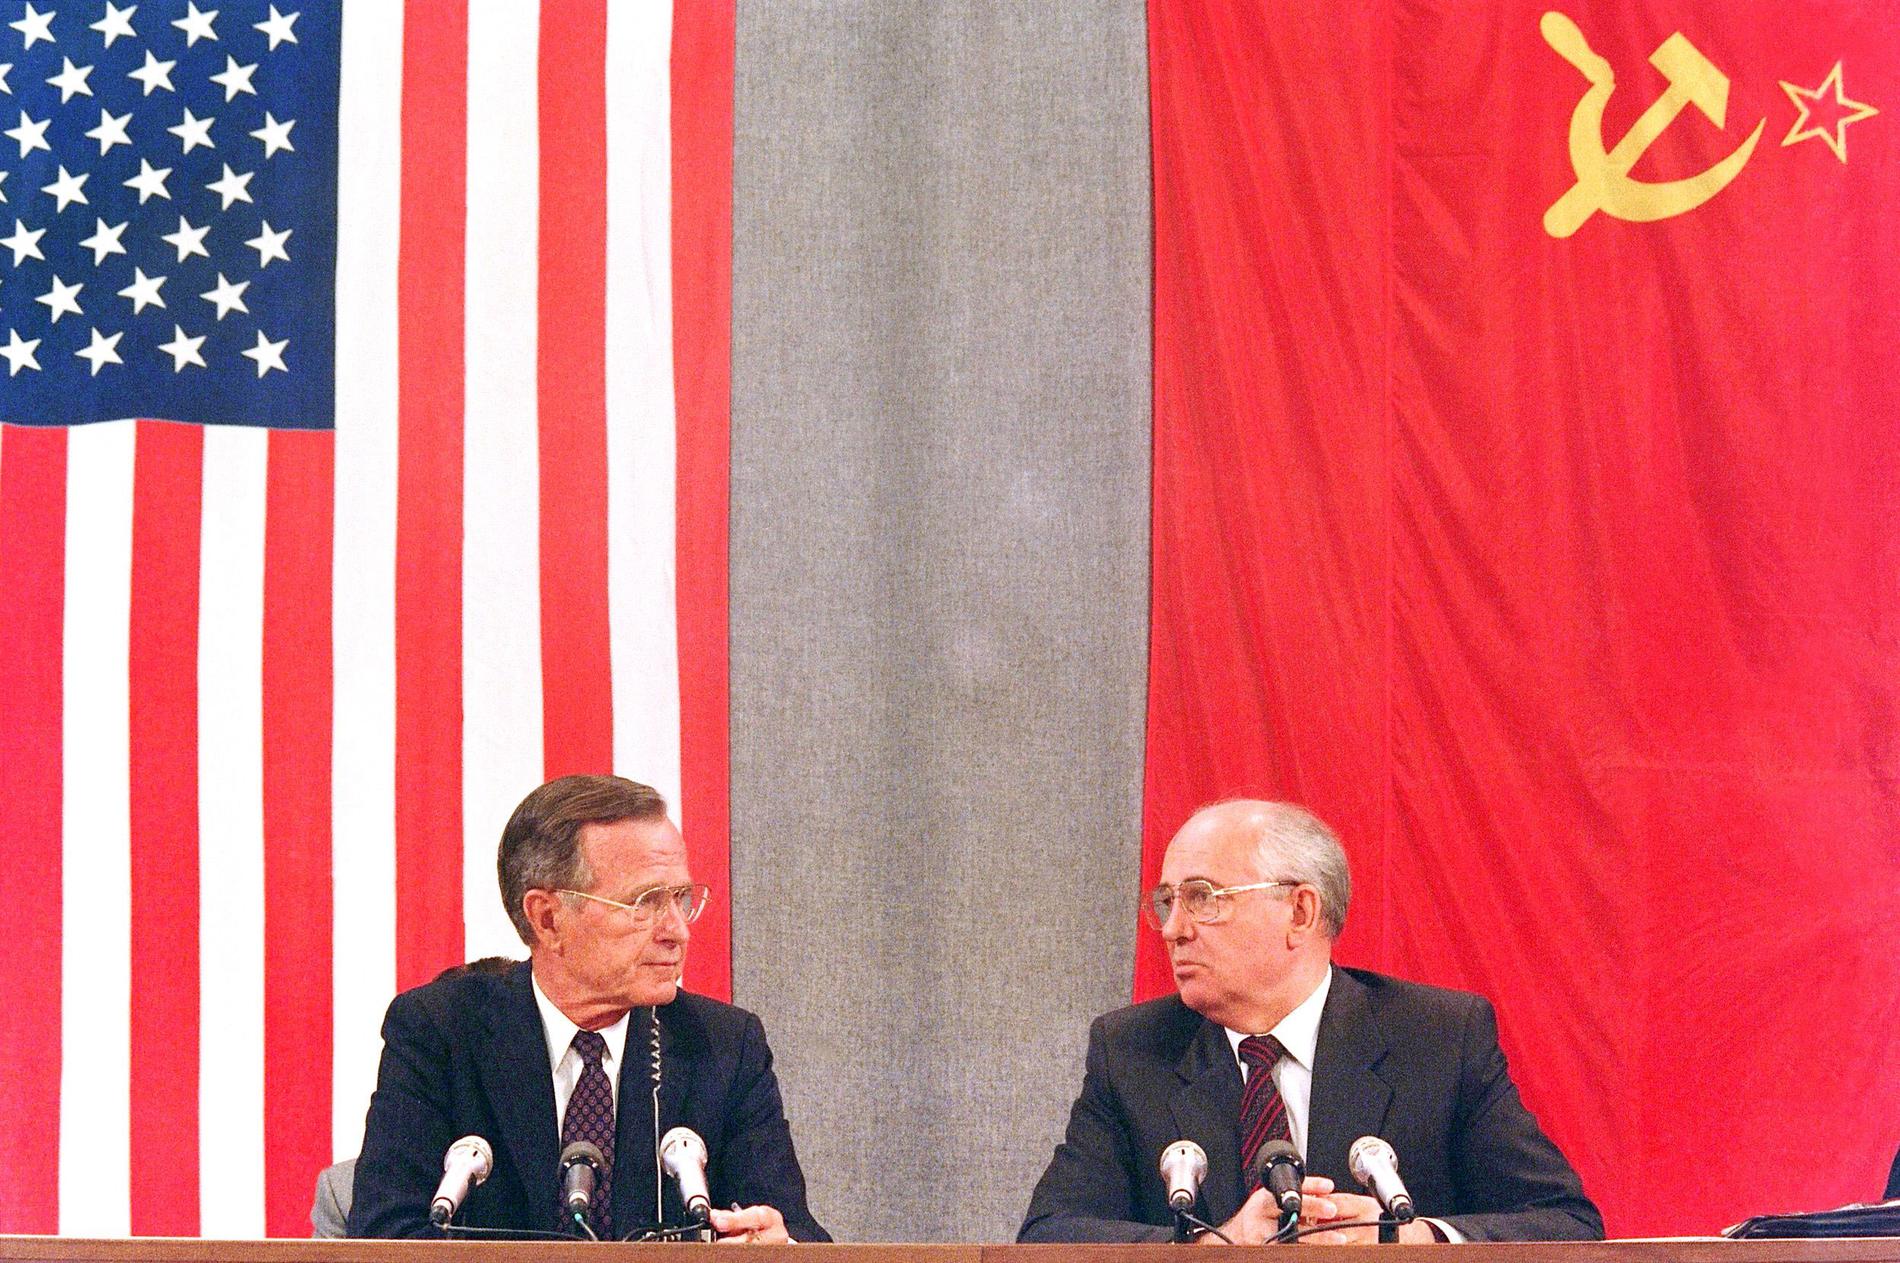 In this file photo taken on July 31, 1991 shows US President George Bush (L) and his Soviet counterpart Mikhail Gorbachev during a press conference in Moscow concluding the two-day US-Soviet Summit dedicated to the disarmament. - Former US president George H.W. Bush, who helped steer America through the end of the Cold War, has died at age 94, his family announced late Friday November 30, 2018. "Jeb, Neil, Marvin, Doro and I are saddened to announce that after 94 remarkable years, our dear Dad has died," his son, former president George W. Bush, said in a statement released on Twitter by a family spokesman. 